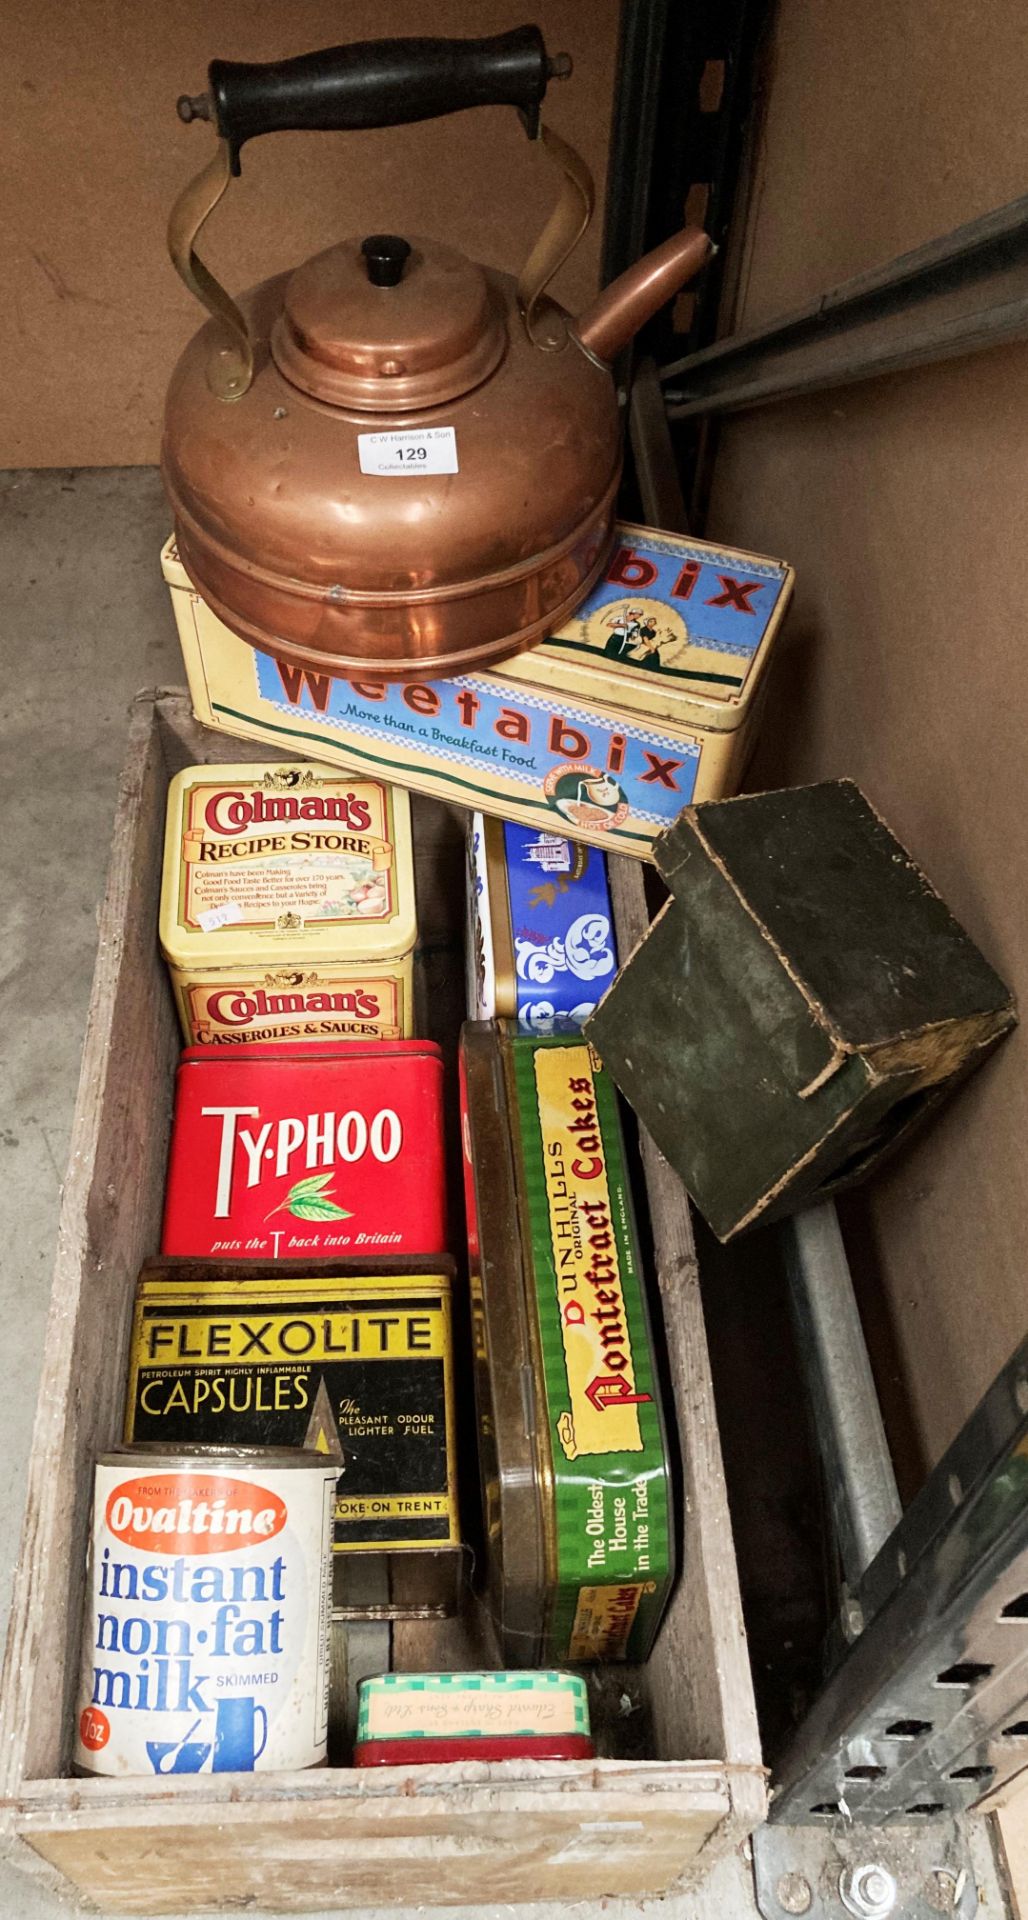 Canada Dry wooden crate and contents - copper kettle and a quantity of old food and other tins